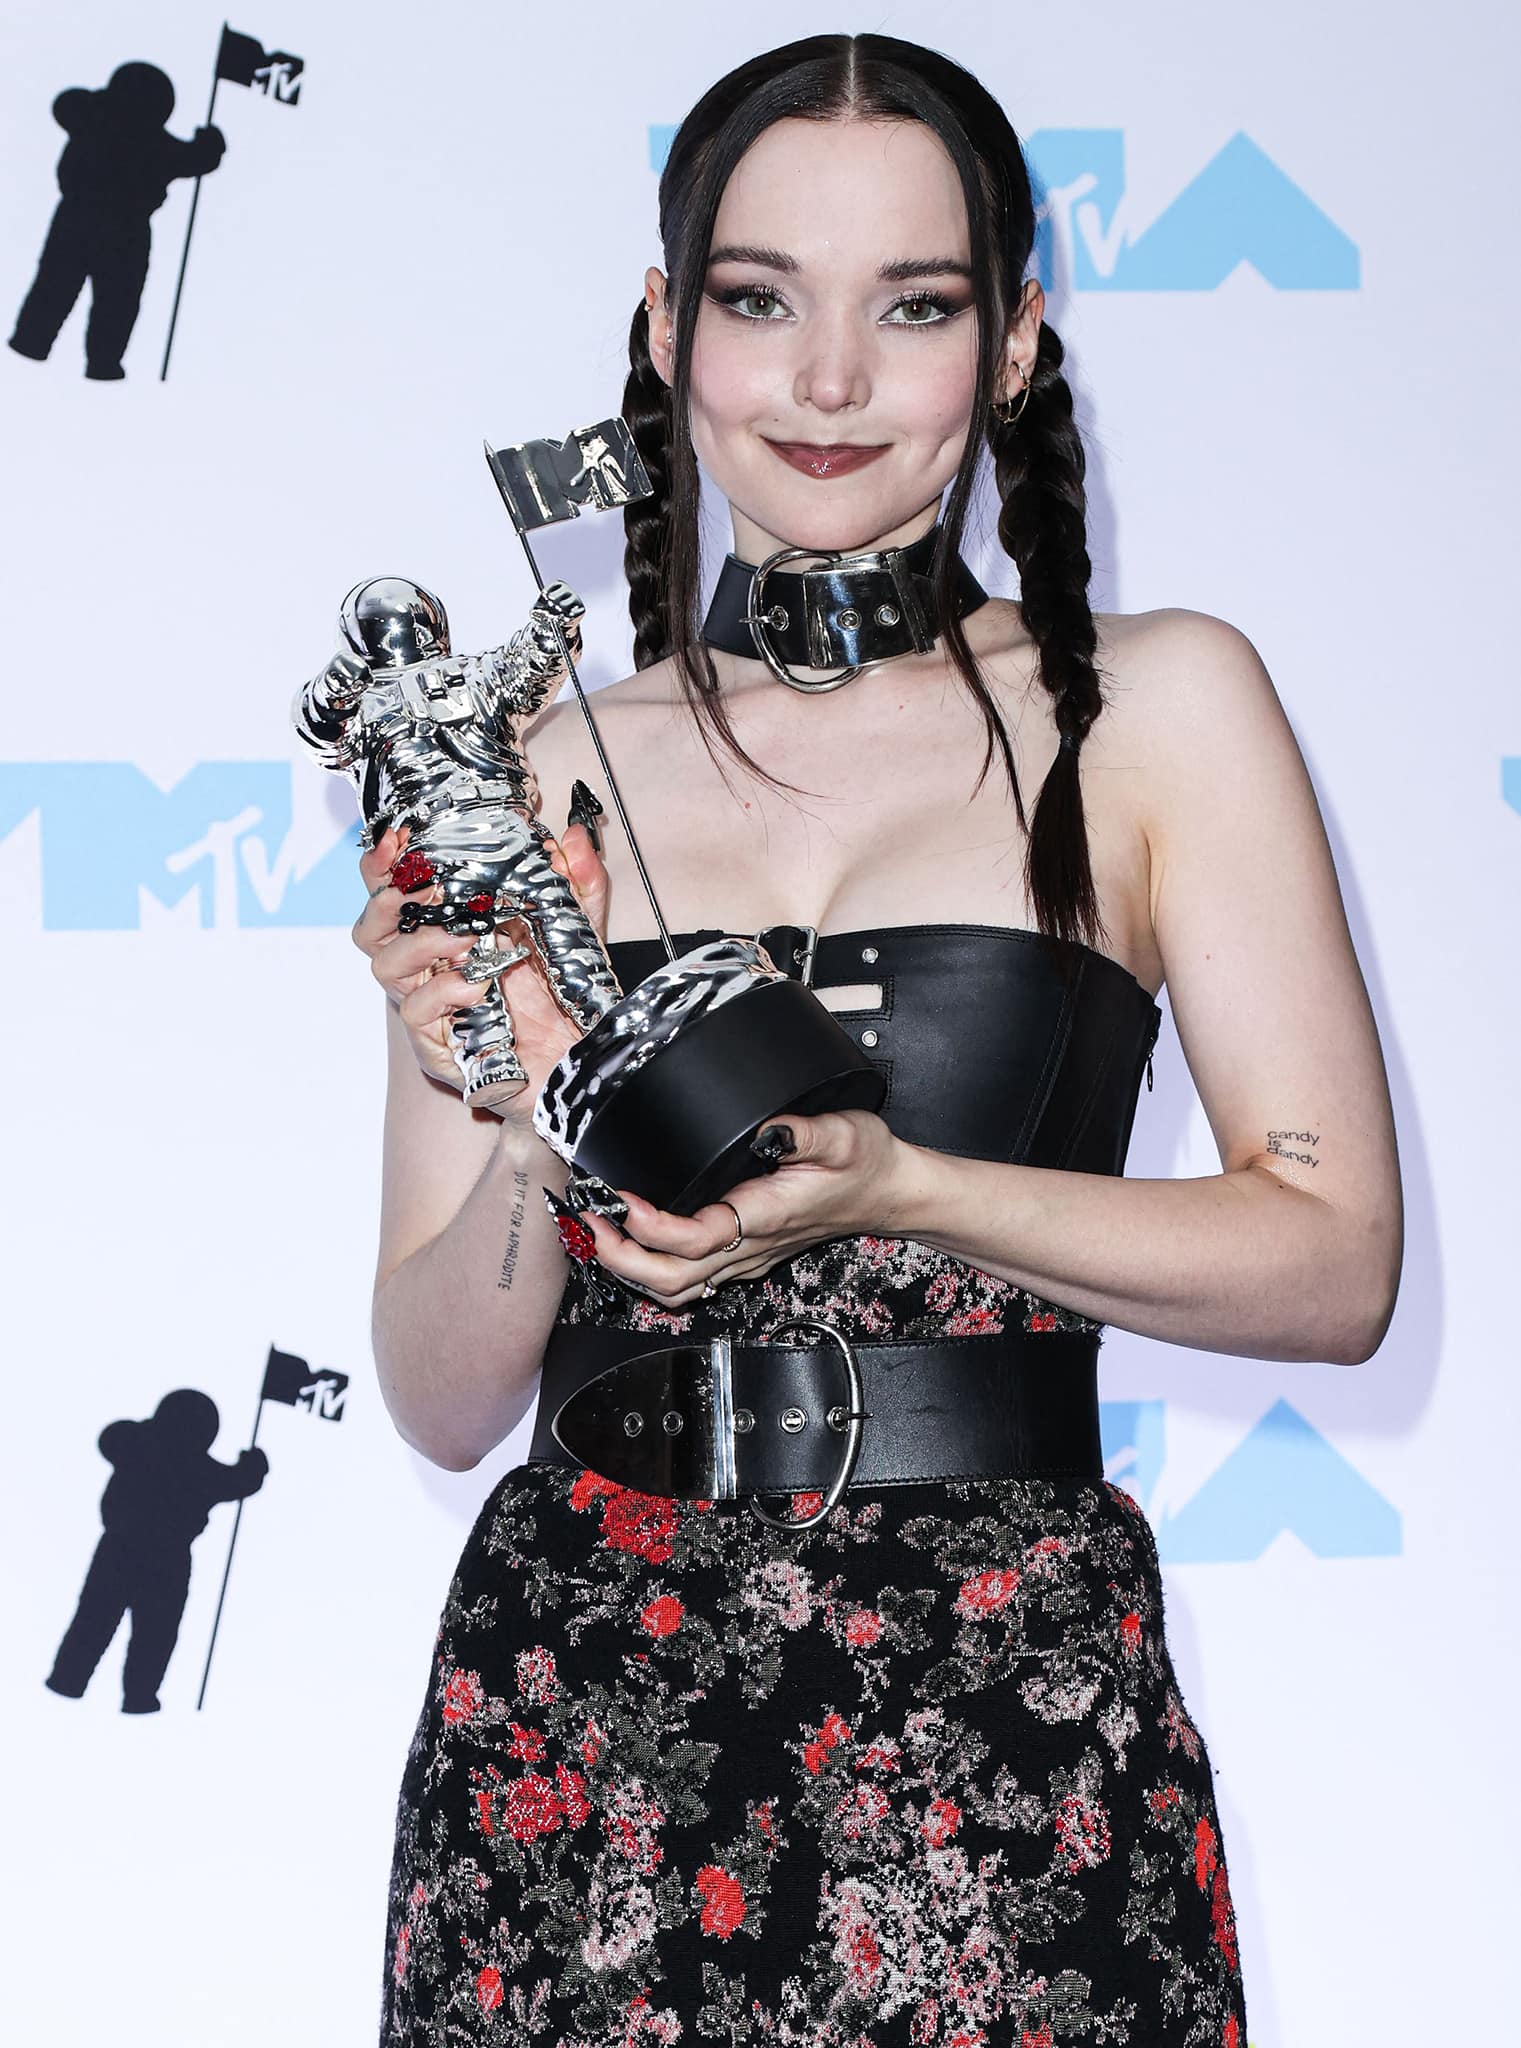 Best New Artist winner Dove Cameron styles her dark tresses in pigtail braids and wears gothic makeup with dark eyeshadow and mauve lipstick